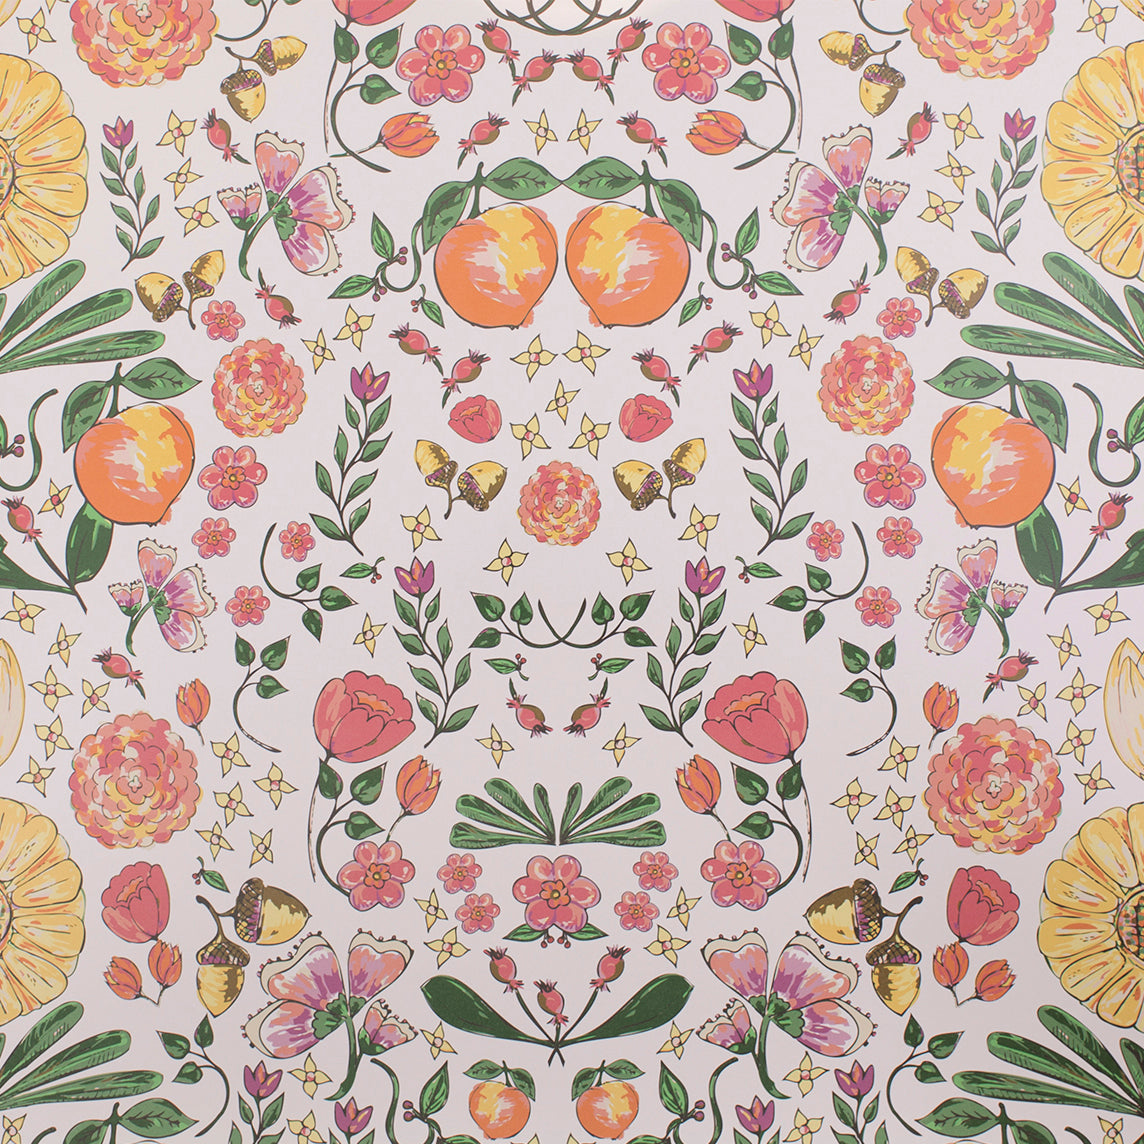 Detail of a painted botanical pattern with flowers, leaves and fruits in red, organge, yellow and green.